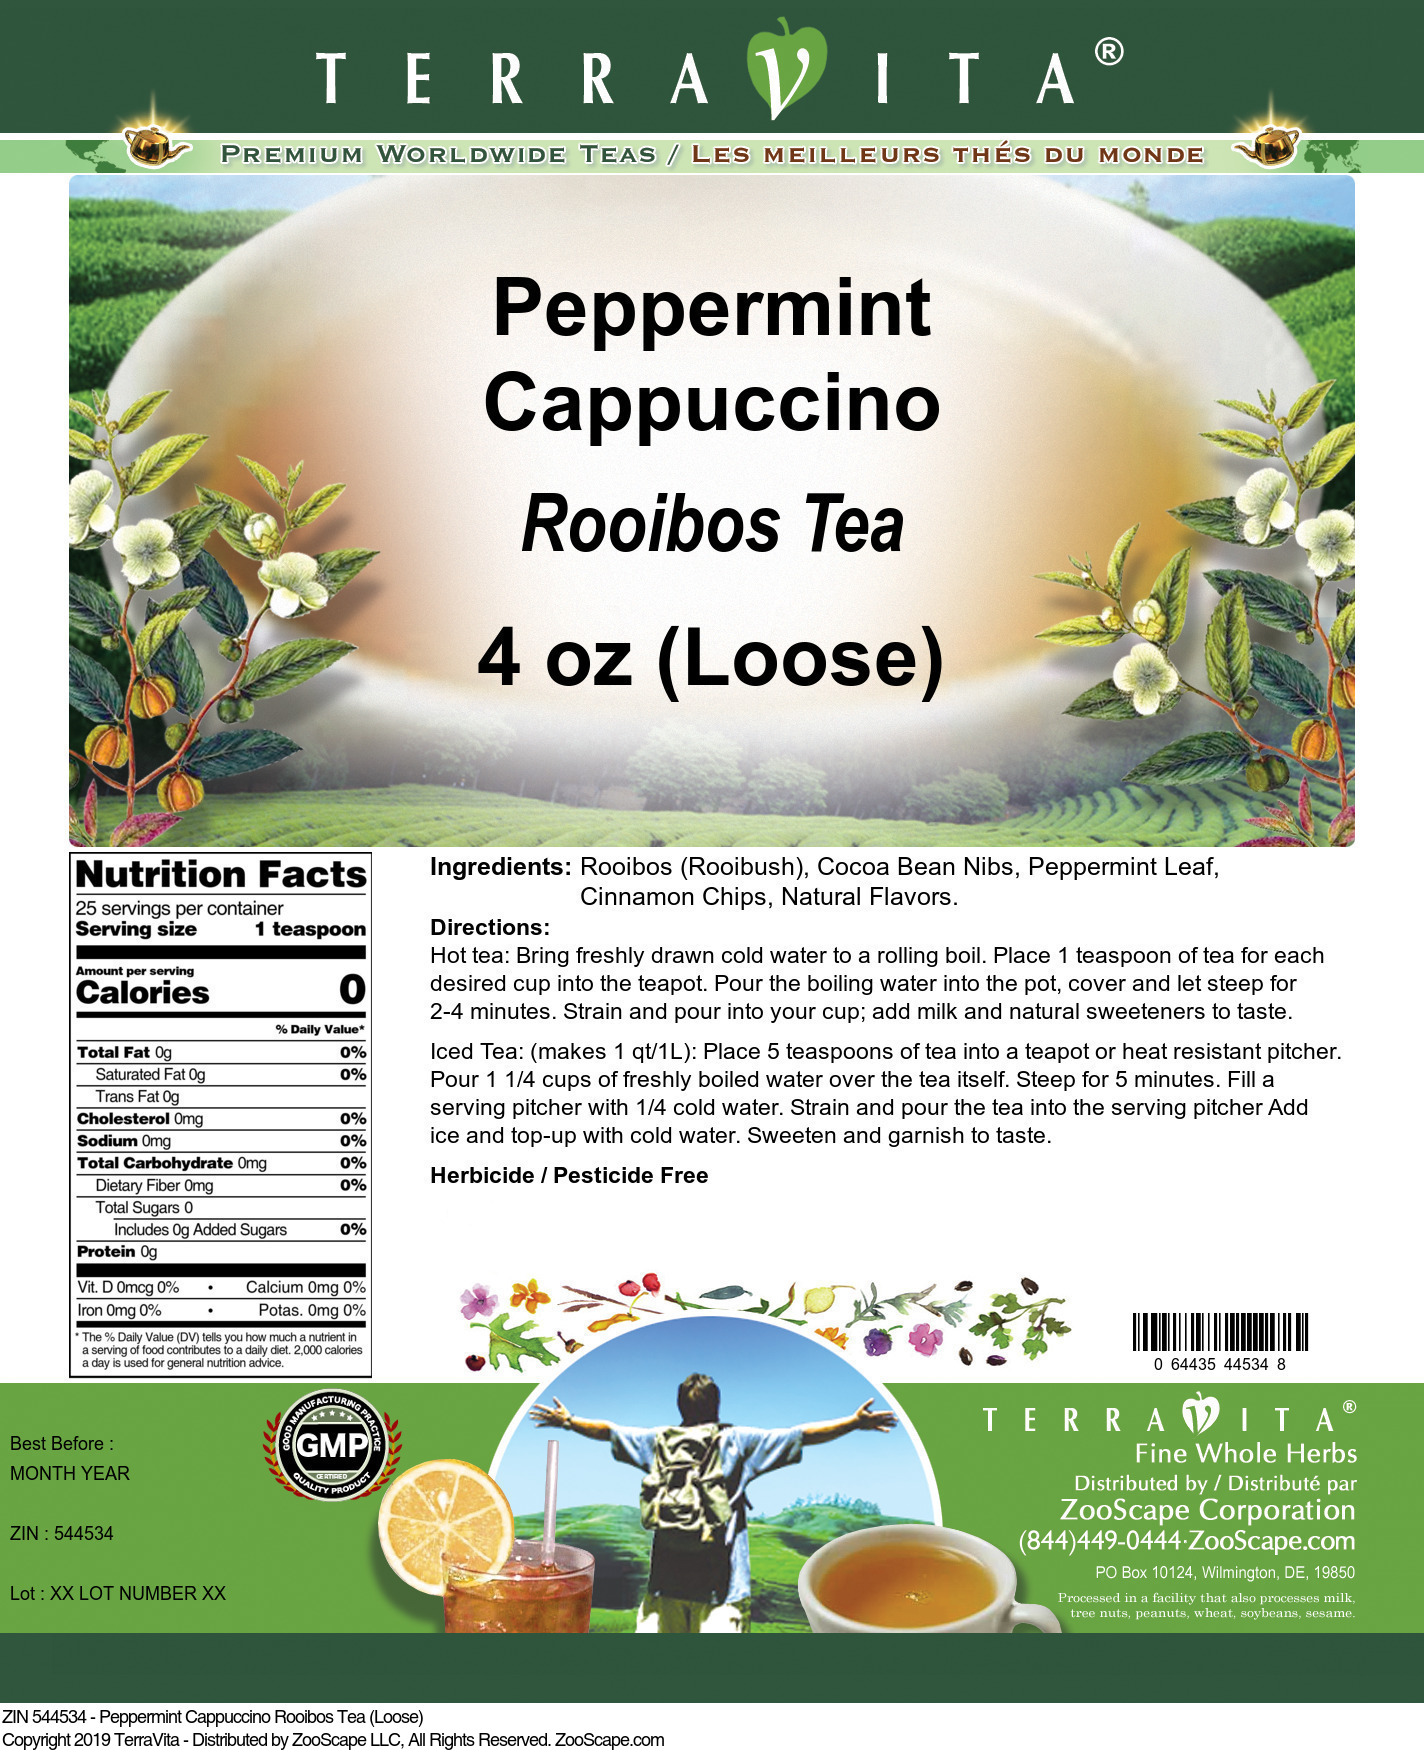 Peppermint Cappuccino Rooibos Tea (Loose) - Label